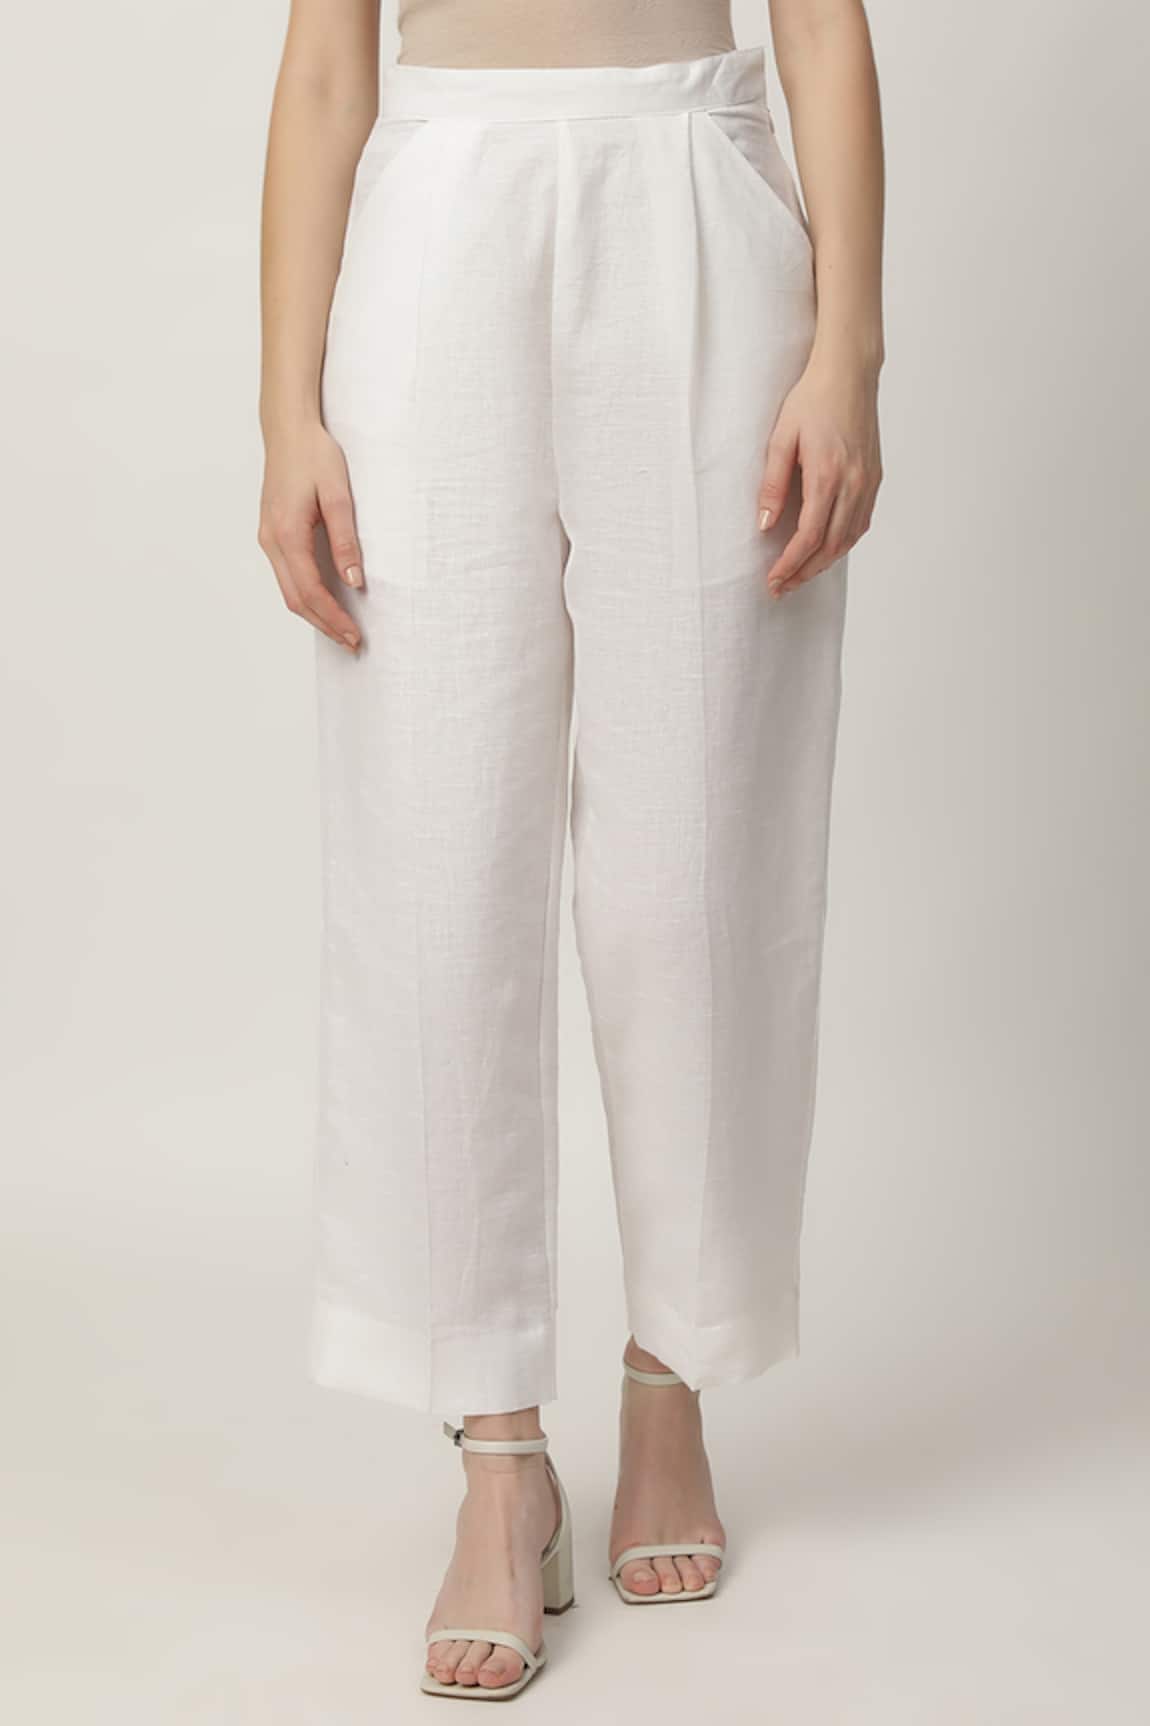 Buy Mens White Linen Trousers for Wedding from Anita Dongre